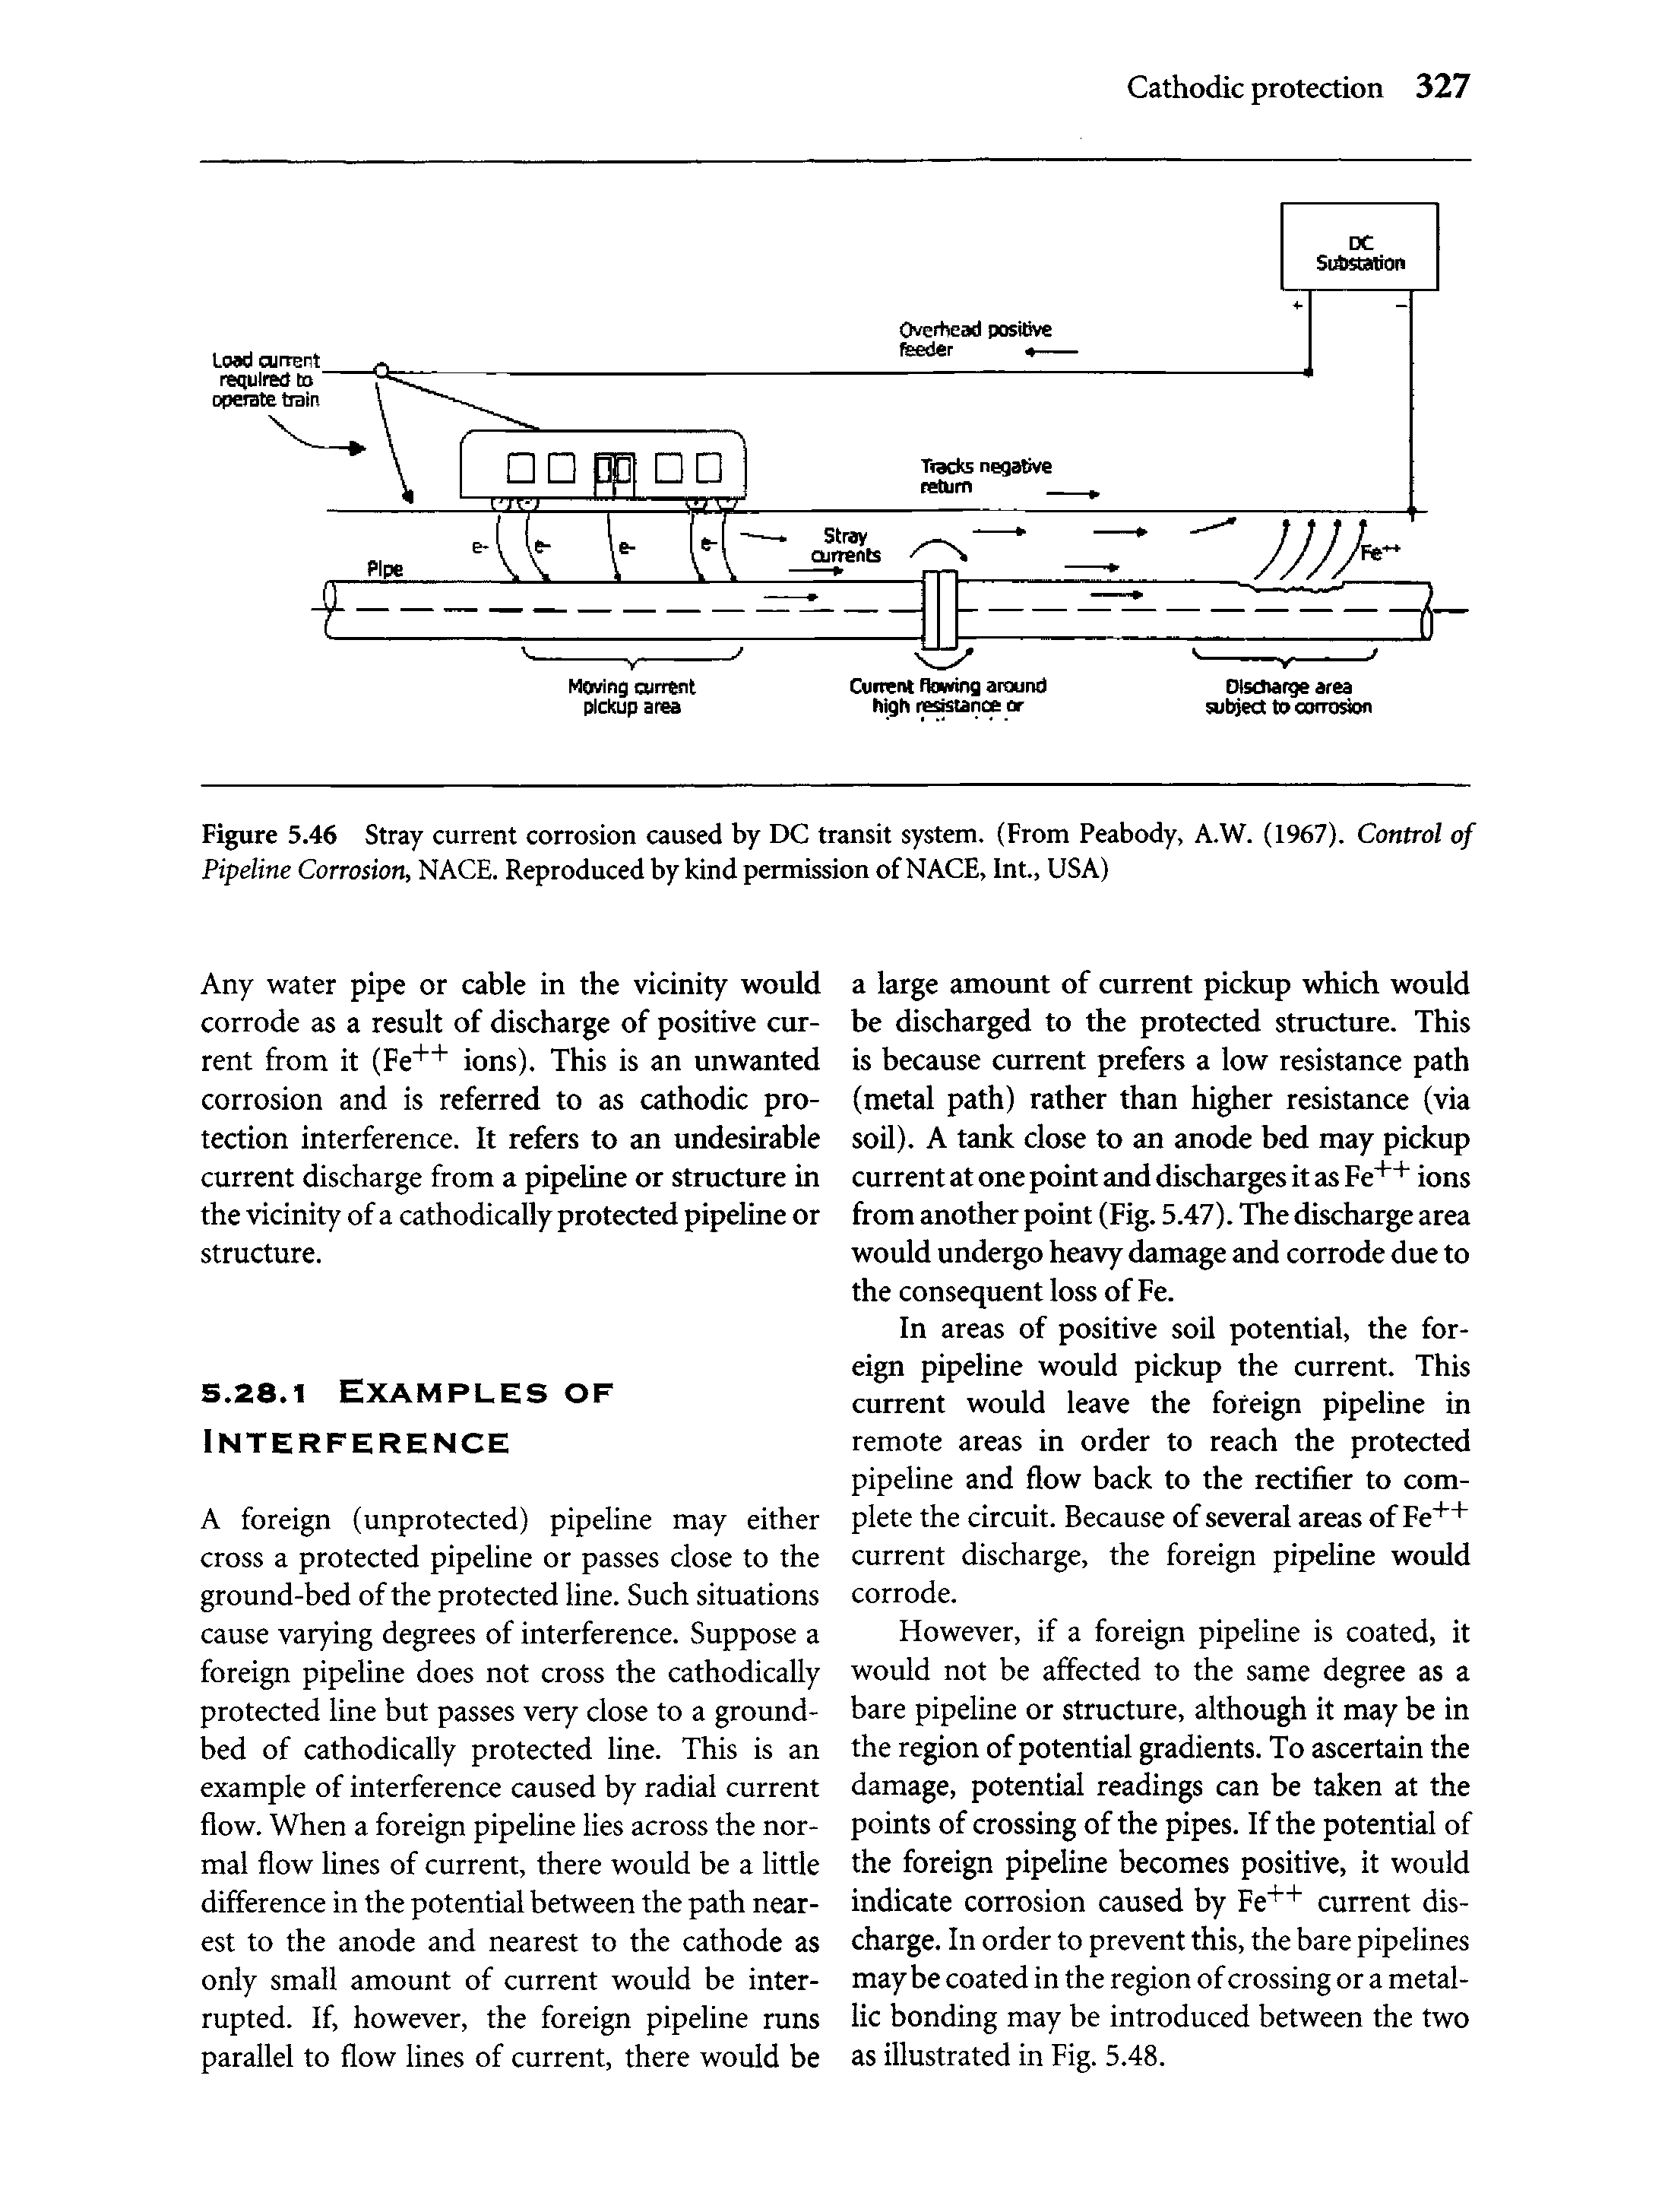 Figure 5.46 Stray current corrosion caused by DC transit system. (From Peabody, A.W. (1967). Control of Pipeline Corrosion, NACE. Reproduced by kind permission of NACE, Int., USA)...